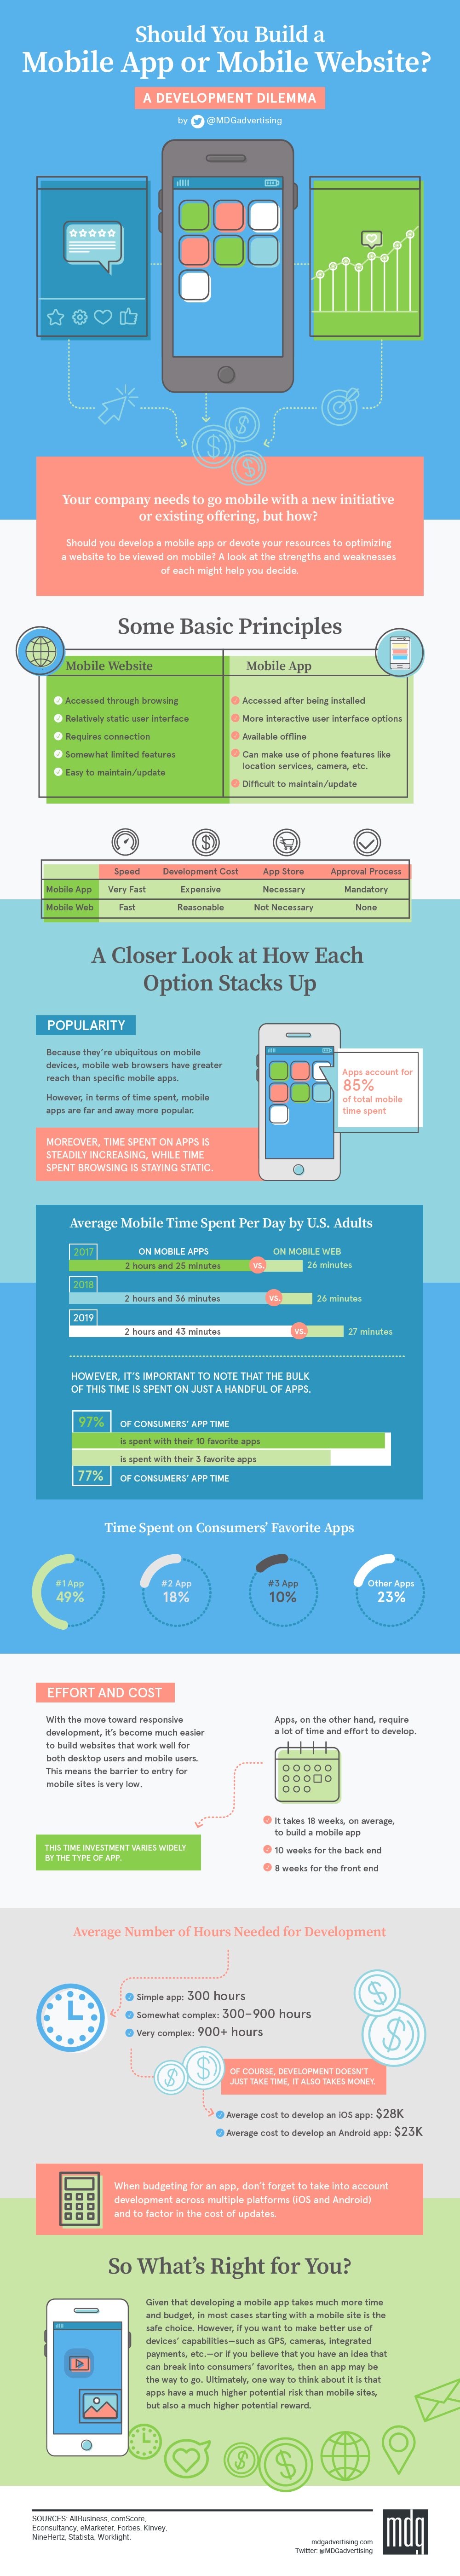 Should You Build a Mobile App or Mobile Website? [Infographic]